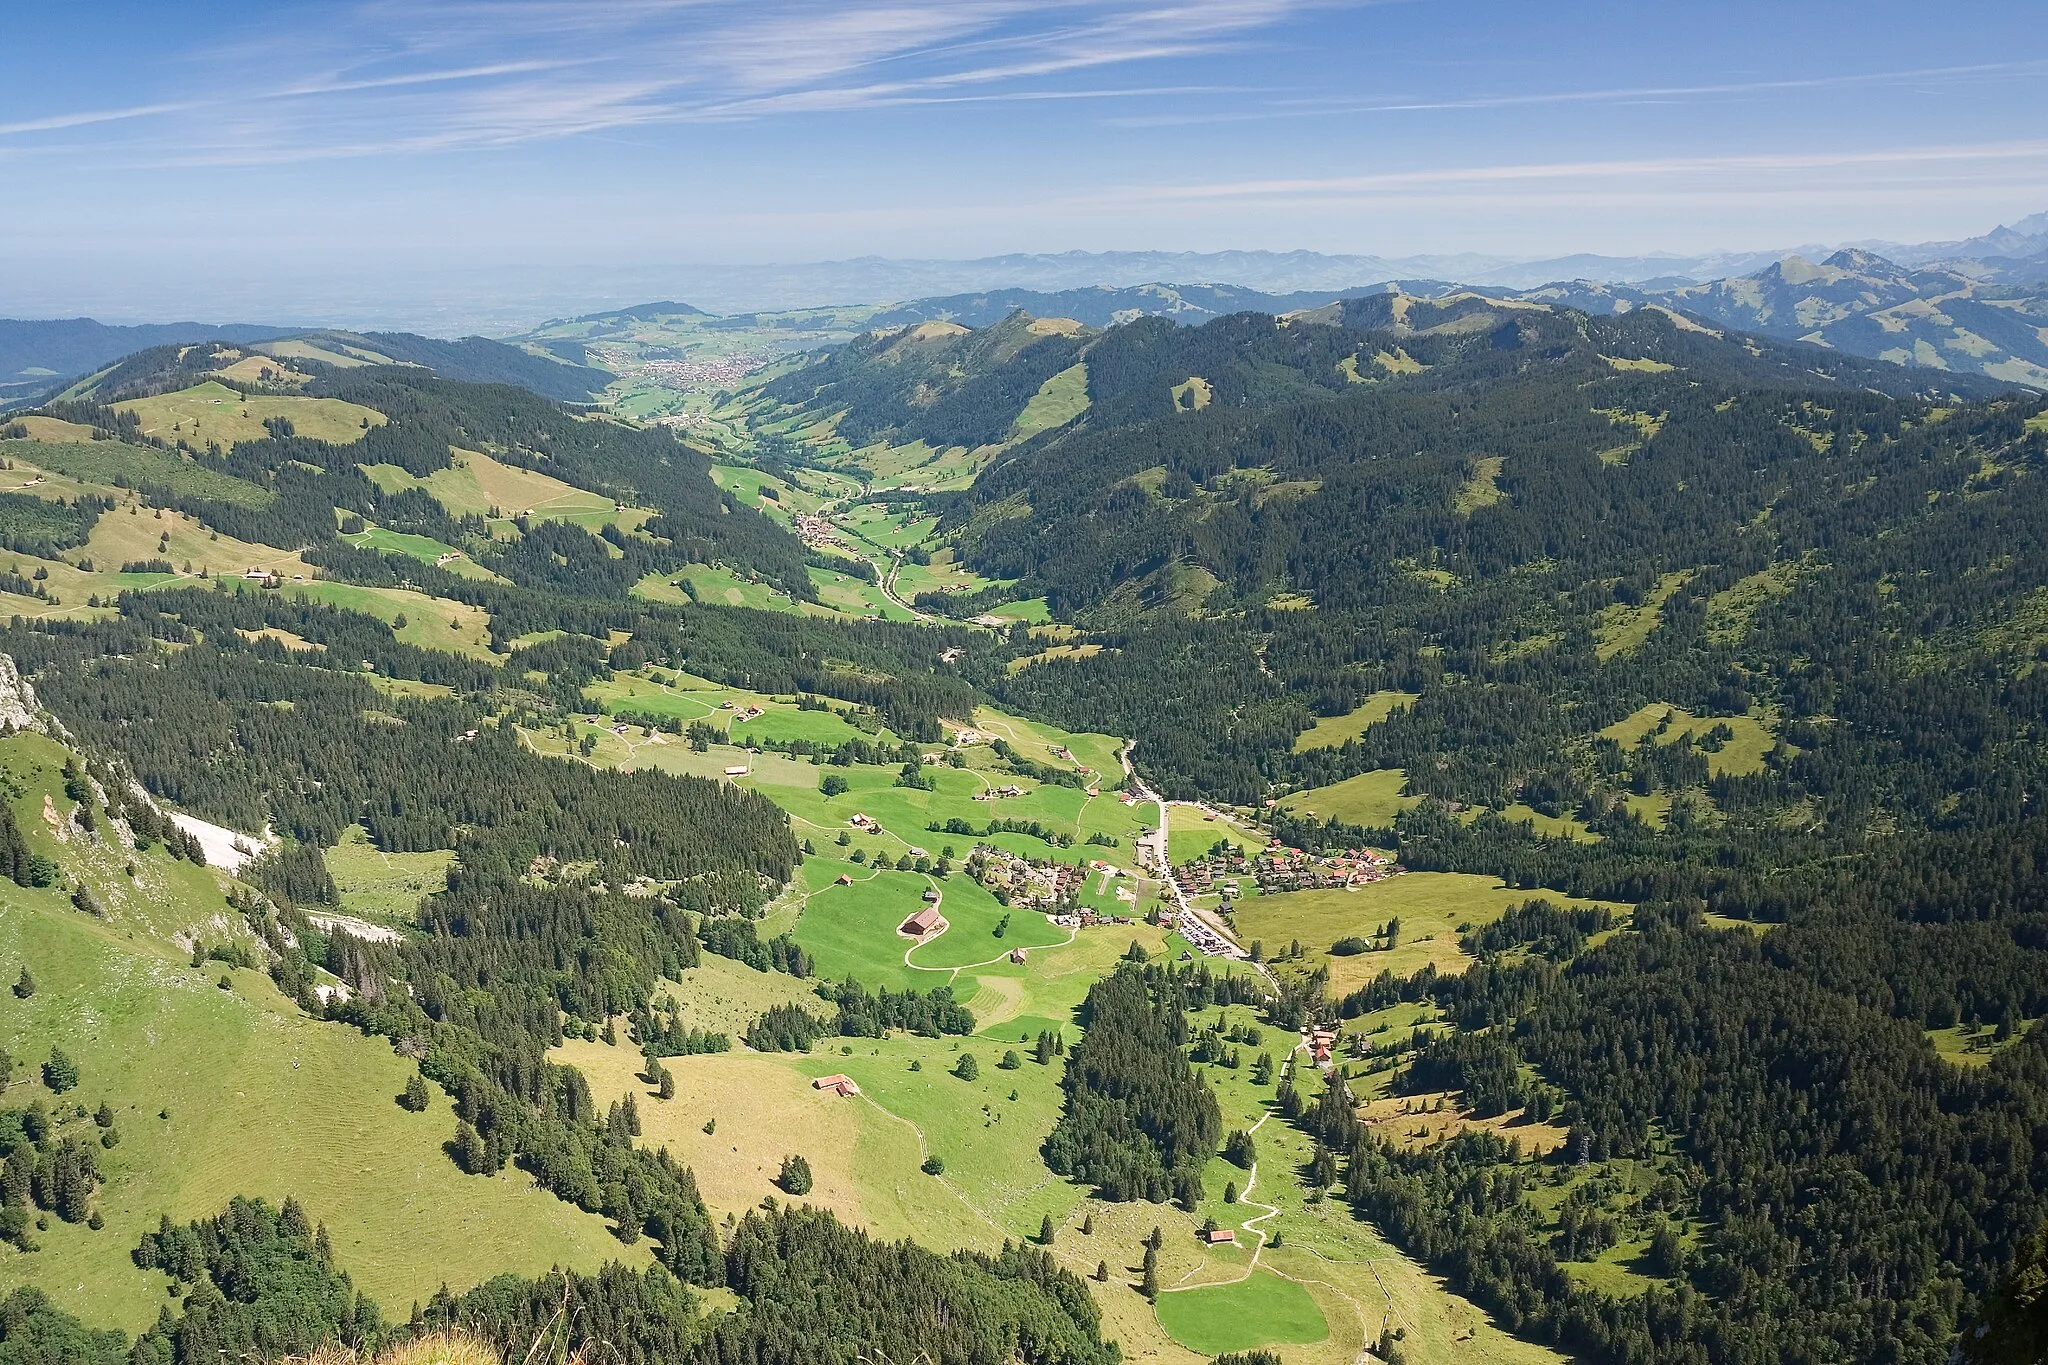 Photo showing: The valley of the Alp river seen from the Mythen mountain. The settlements in the valley are (from nearest to furthest) Brunni, Alpthal, Trachslau and Einsiedeln.